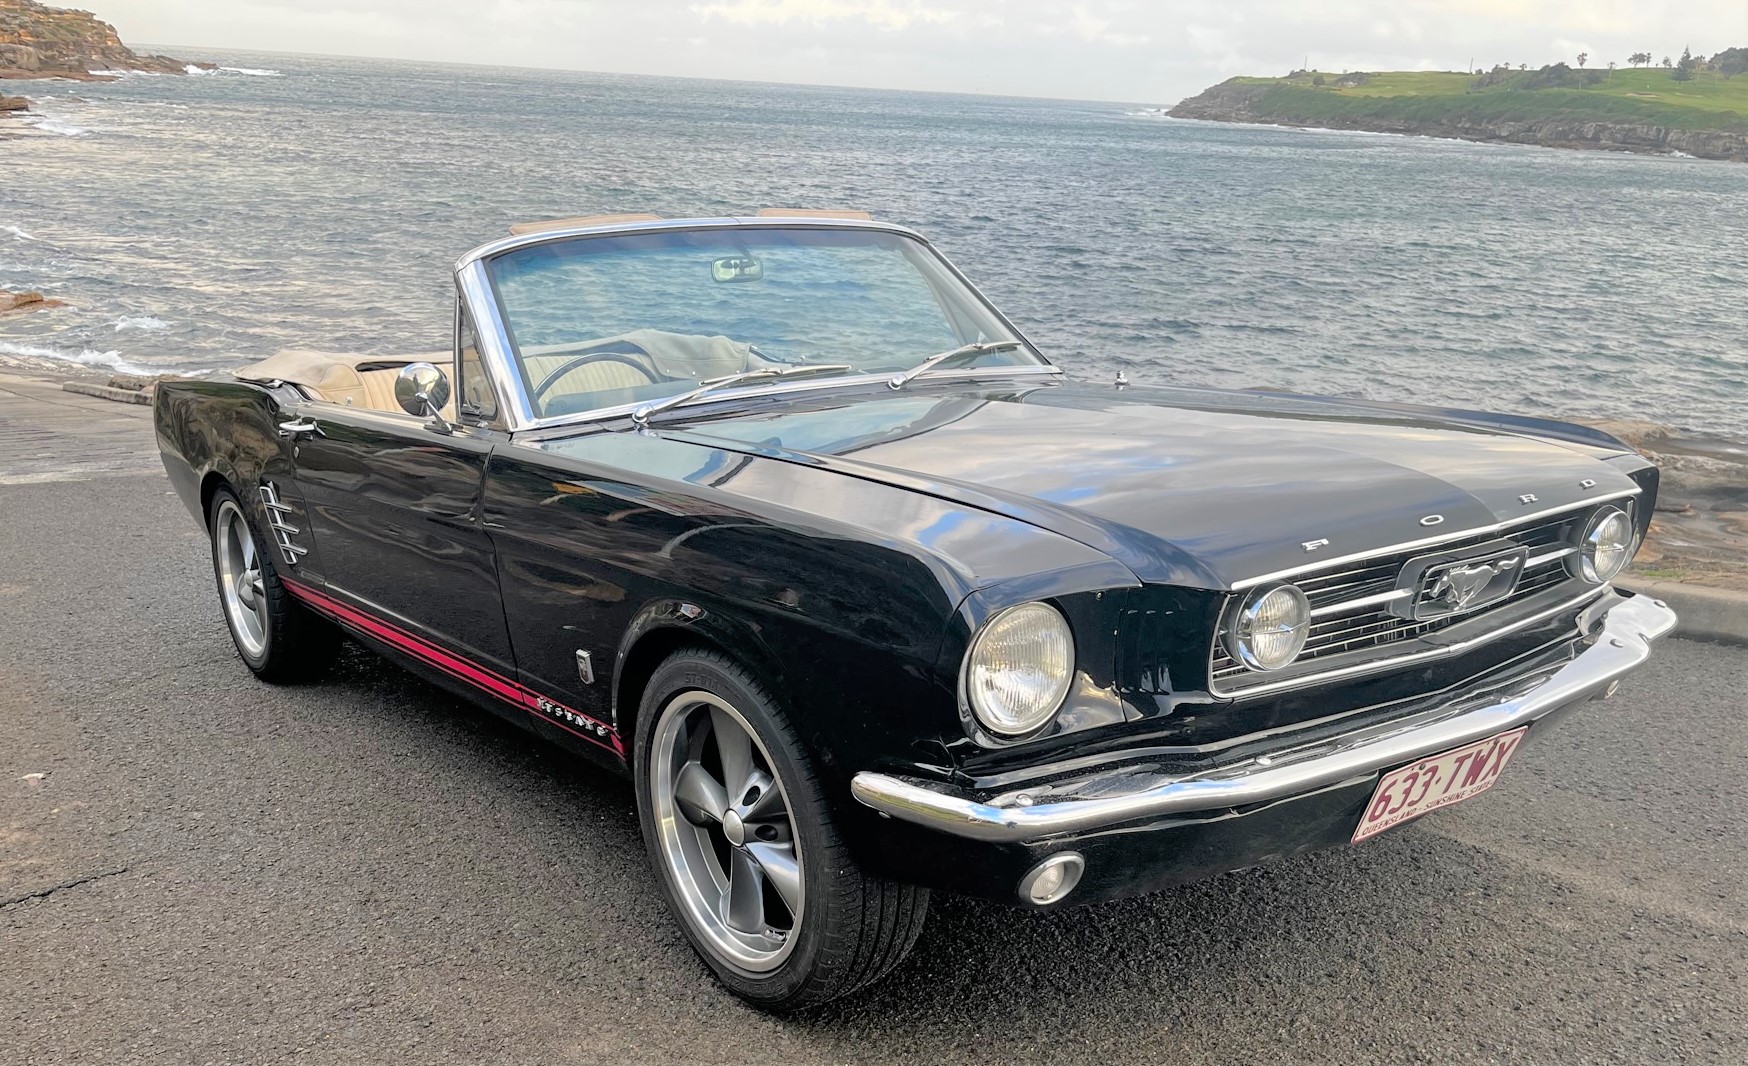 “Black Mamba” – 1966 Mustang GT350. From $750 per day.